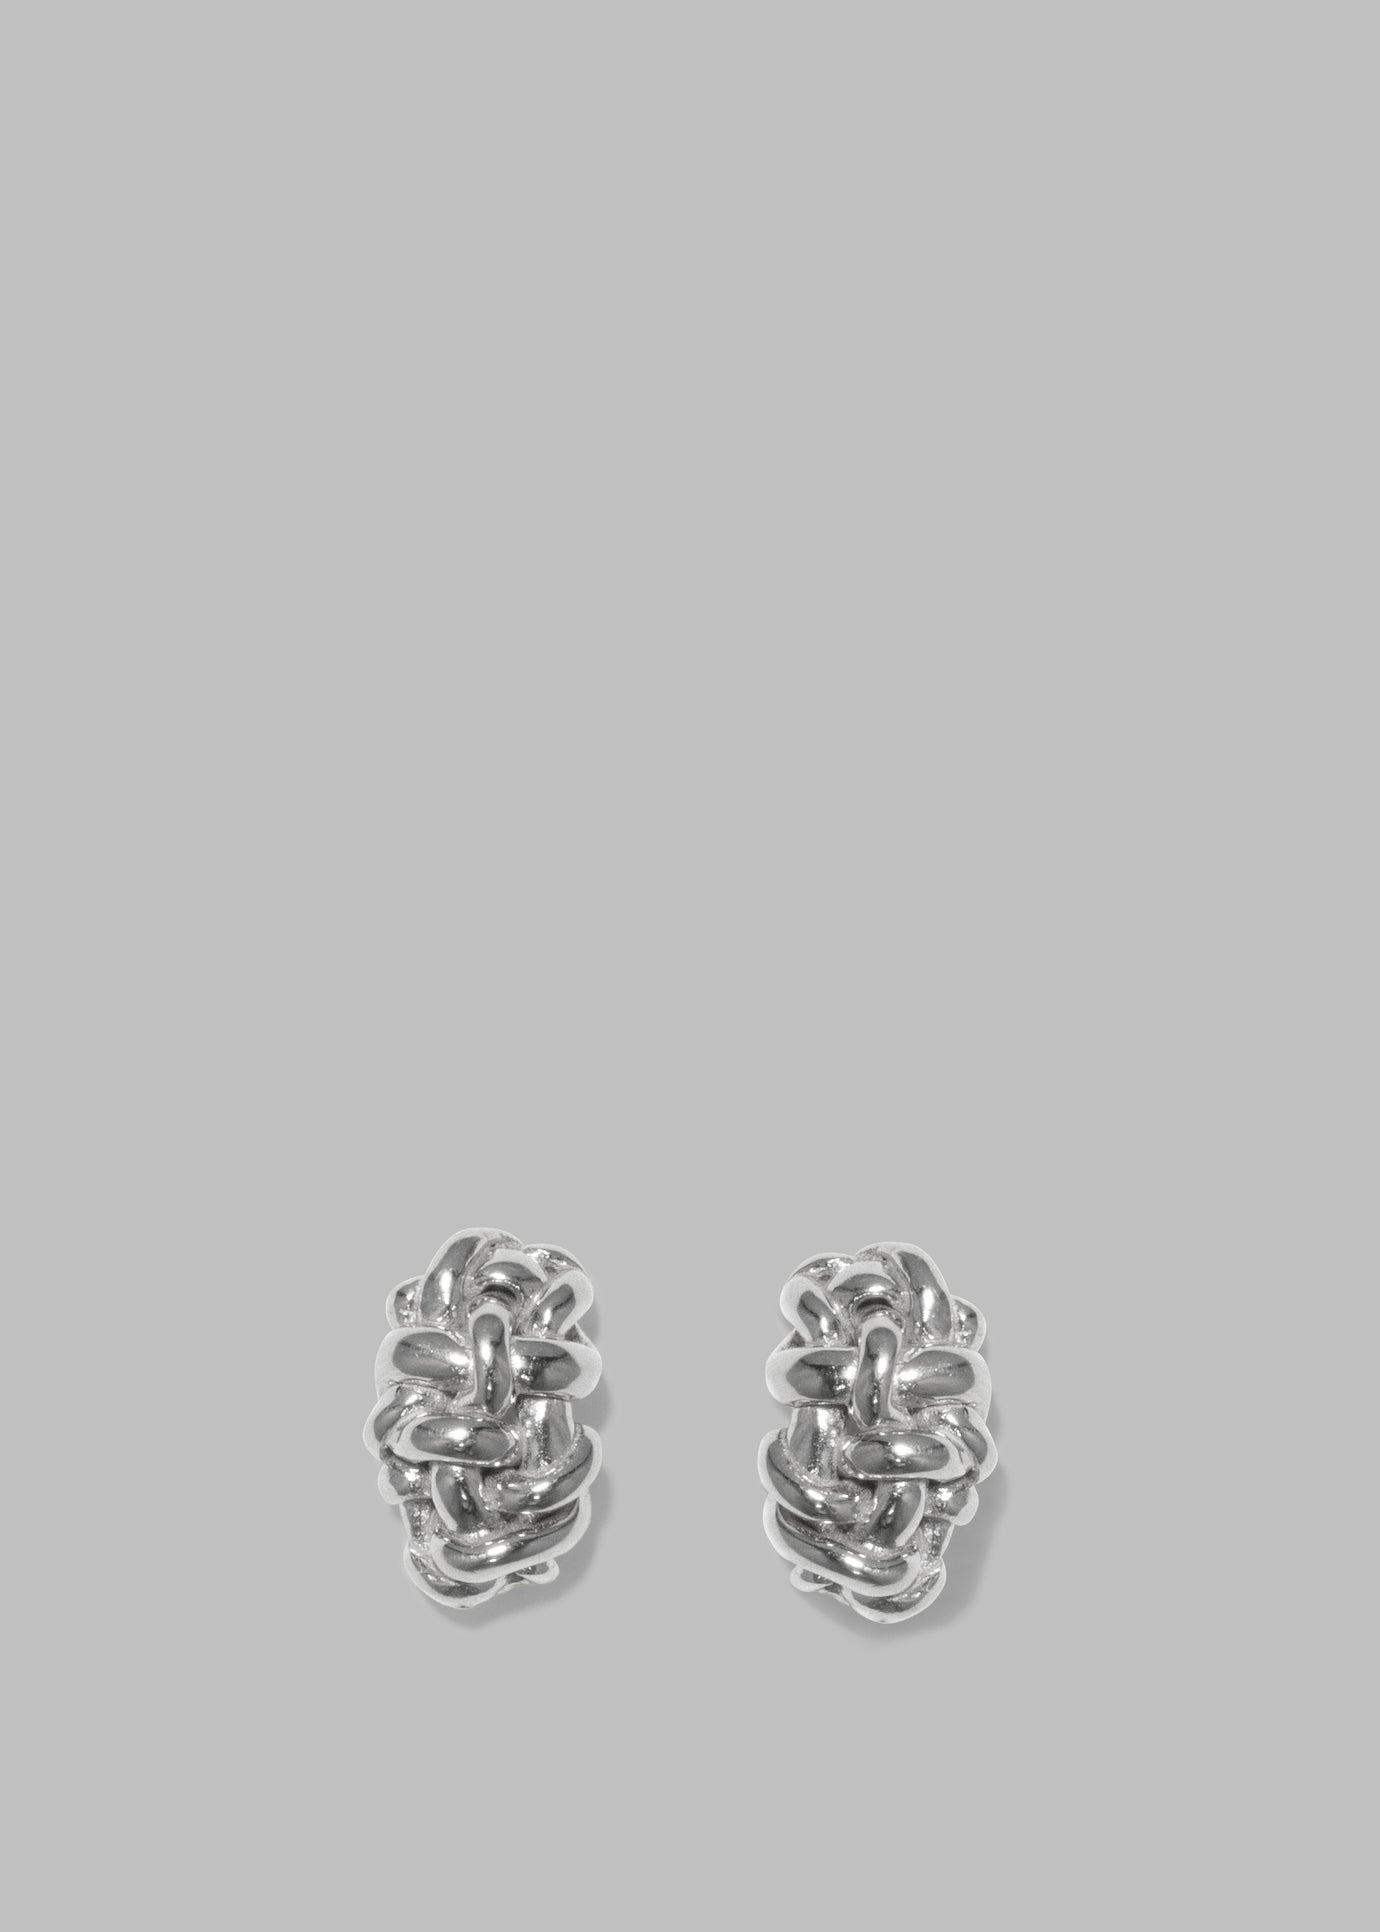 Completedworks The Paths of Memory Earrings - Rhodium Plated